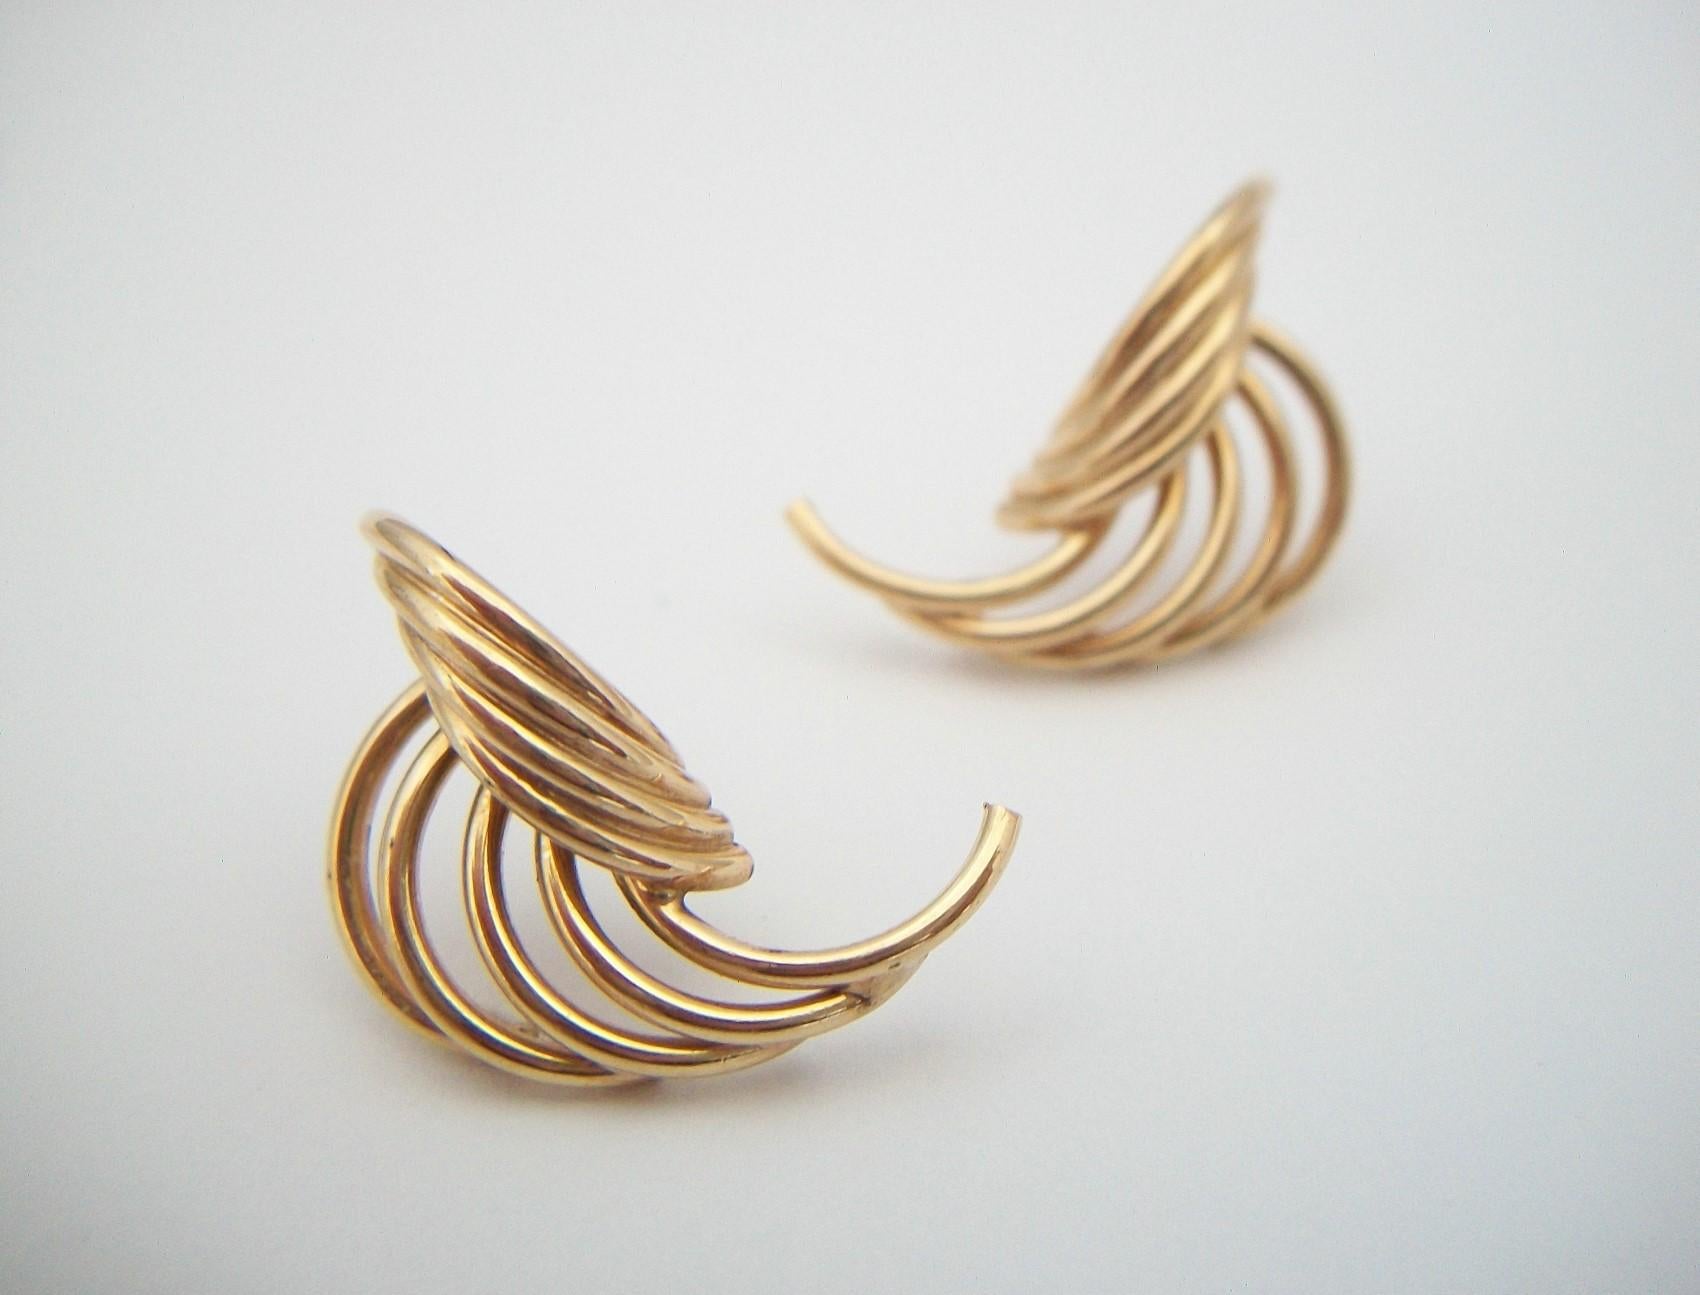 Vintage Pair of 10K Yellow Gold Earrings - U.S. - Circa 1990's In Good Condition For Sale In Chatham, CA